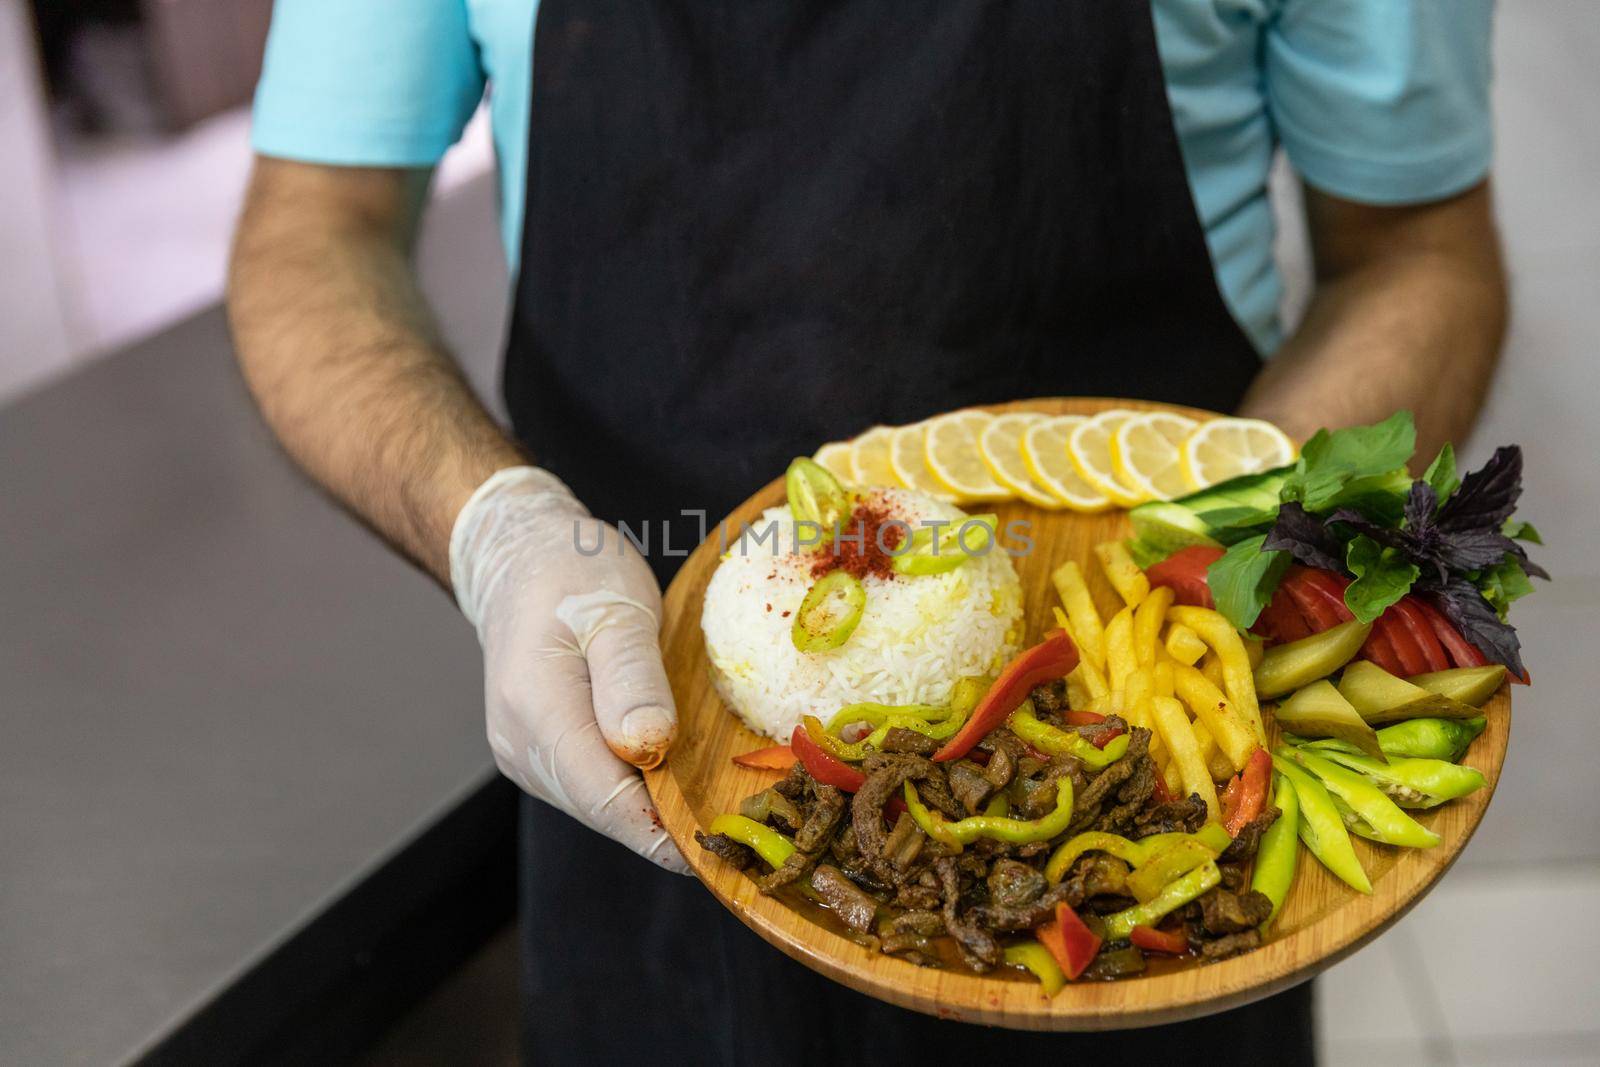 Restaurant chef holding tasty meat meal with salad, vegetables on the wooden plate